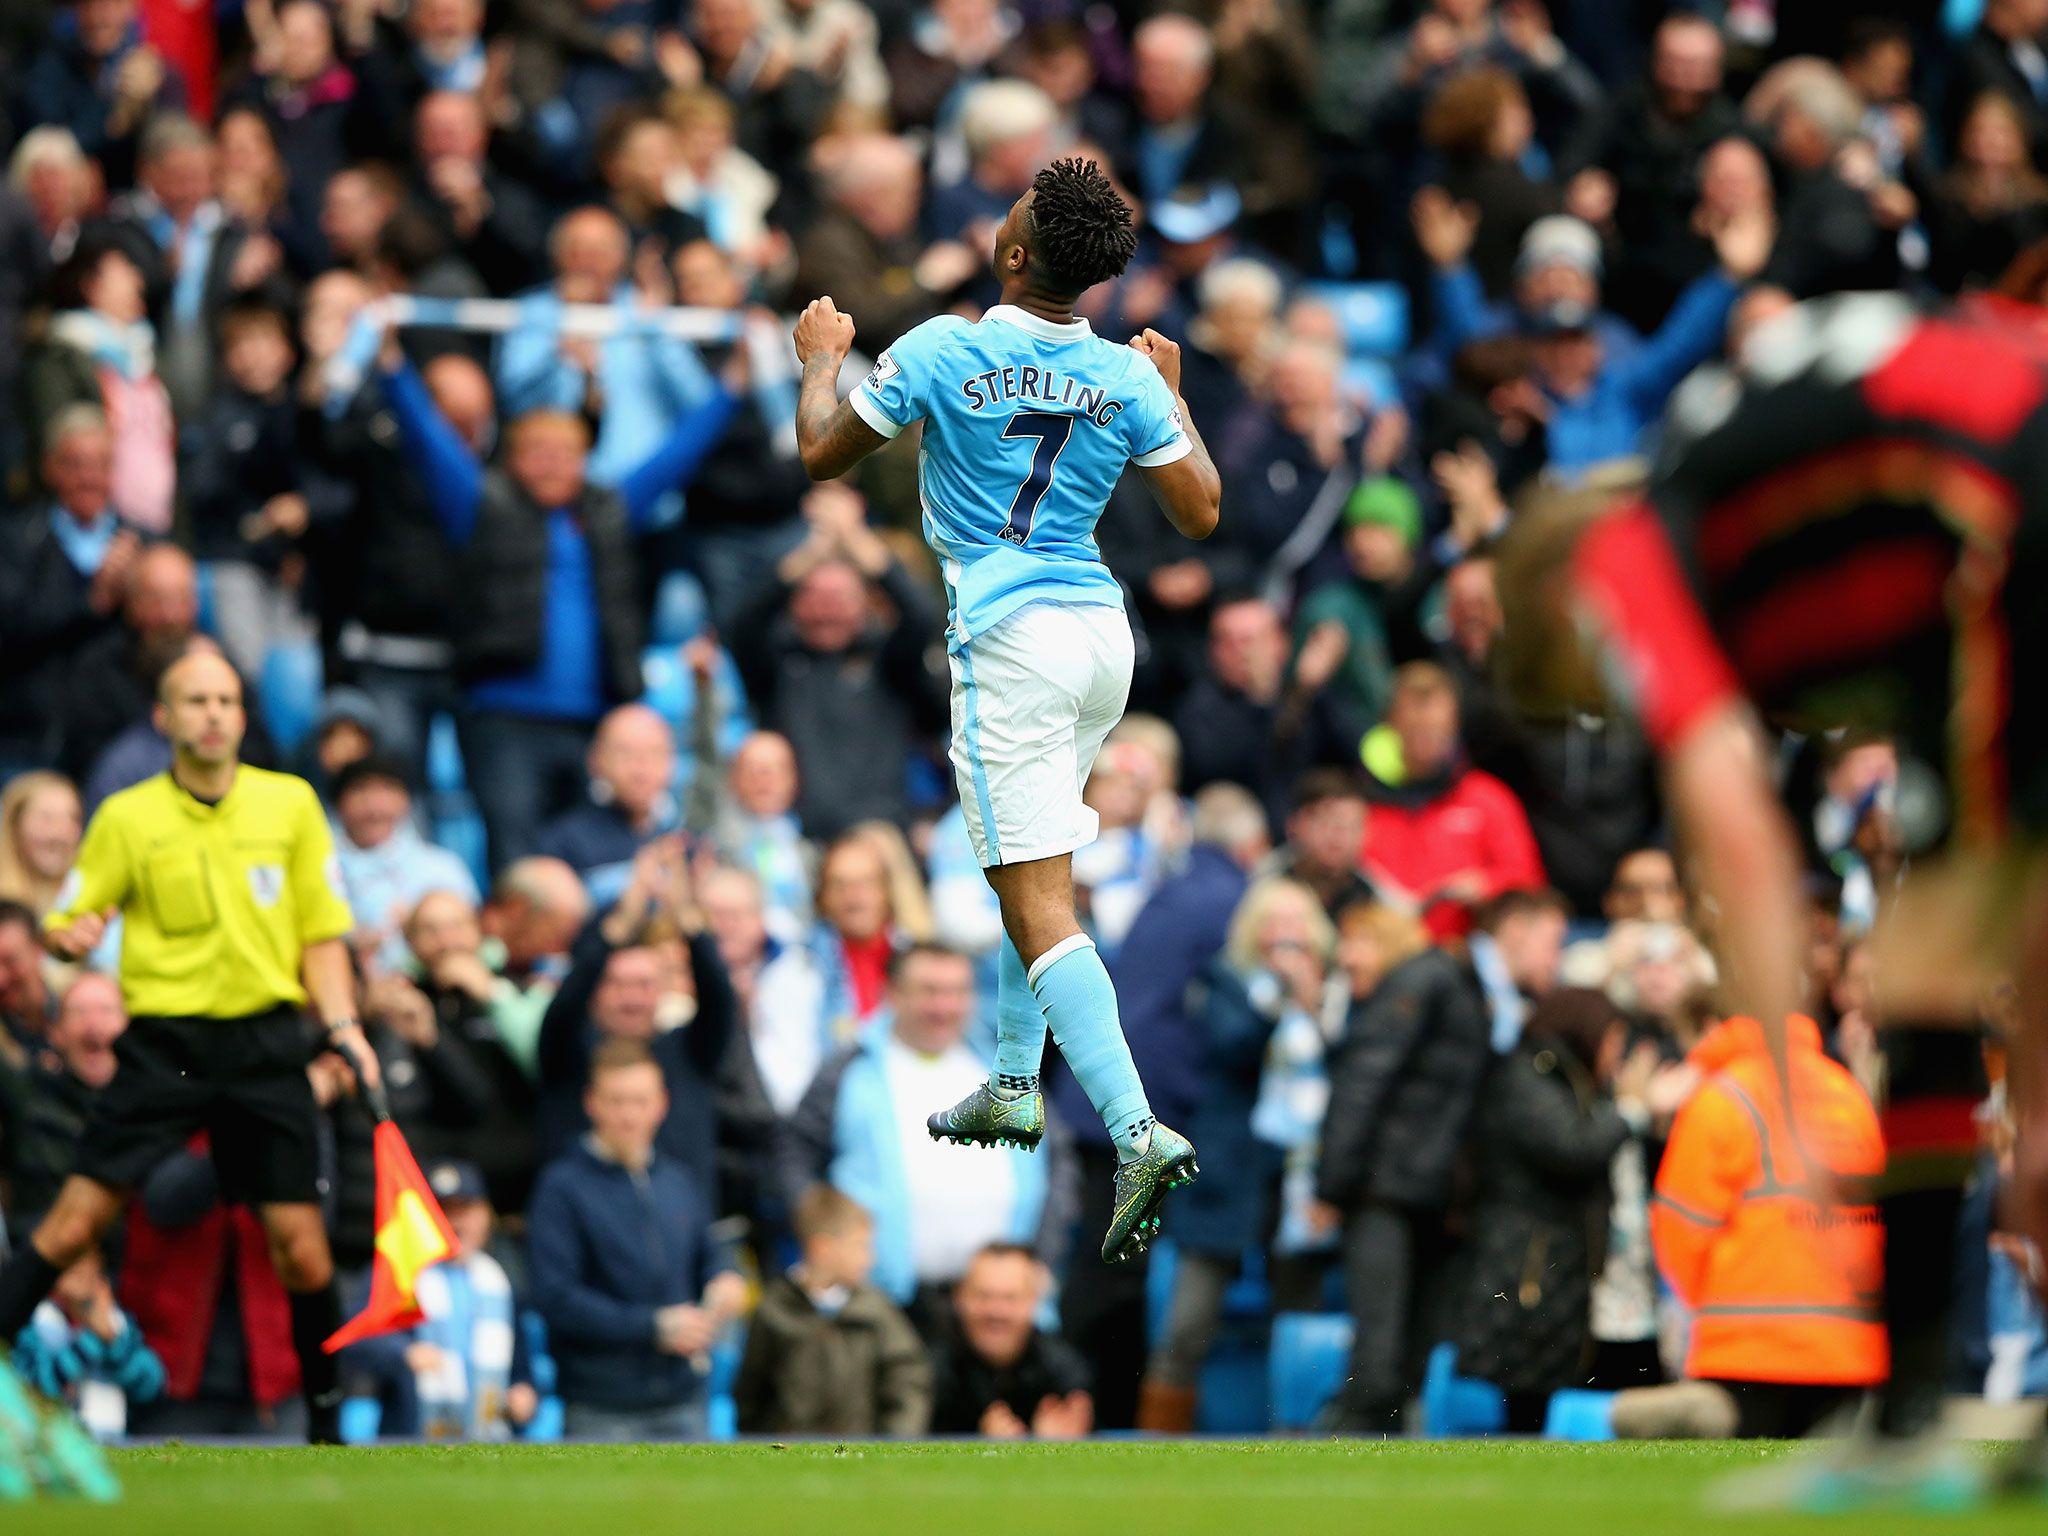 Raheem Sterling: Has the Manchester City player finally found his